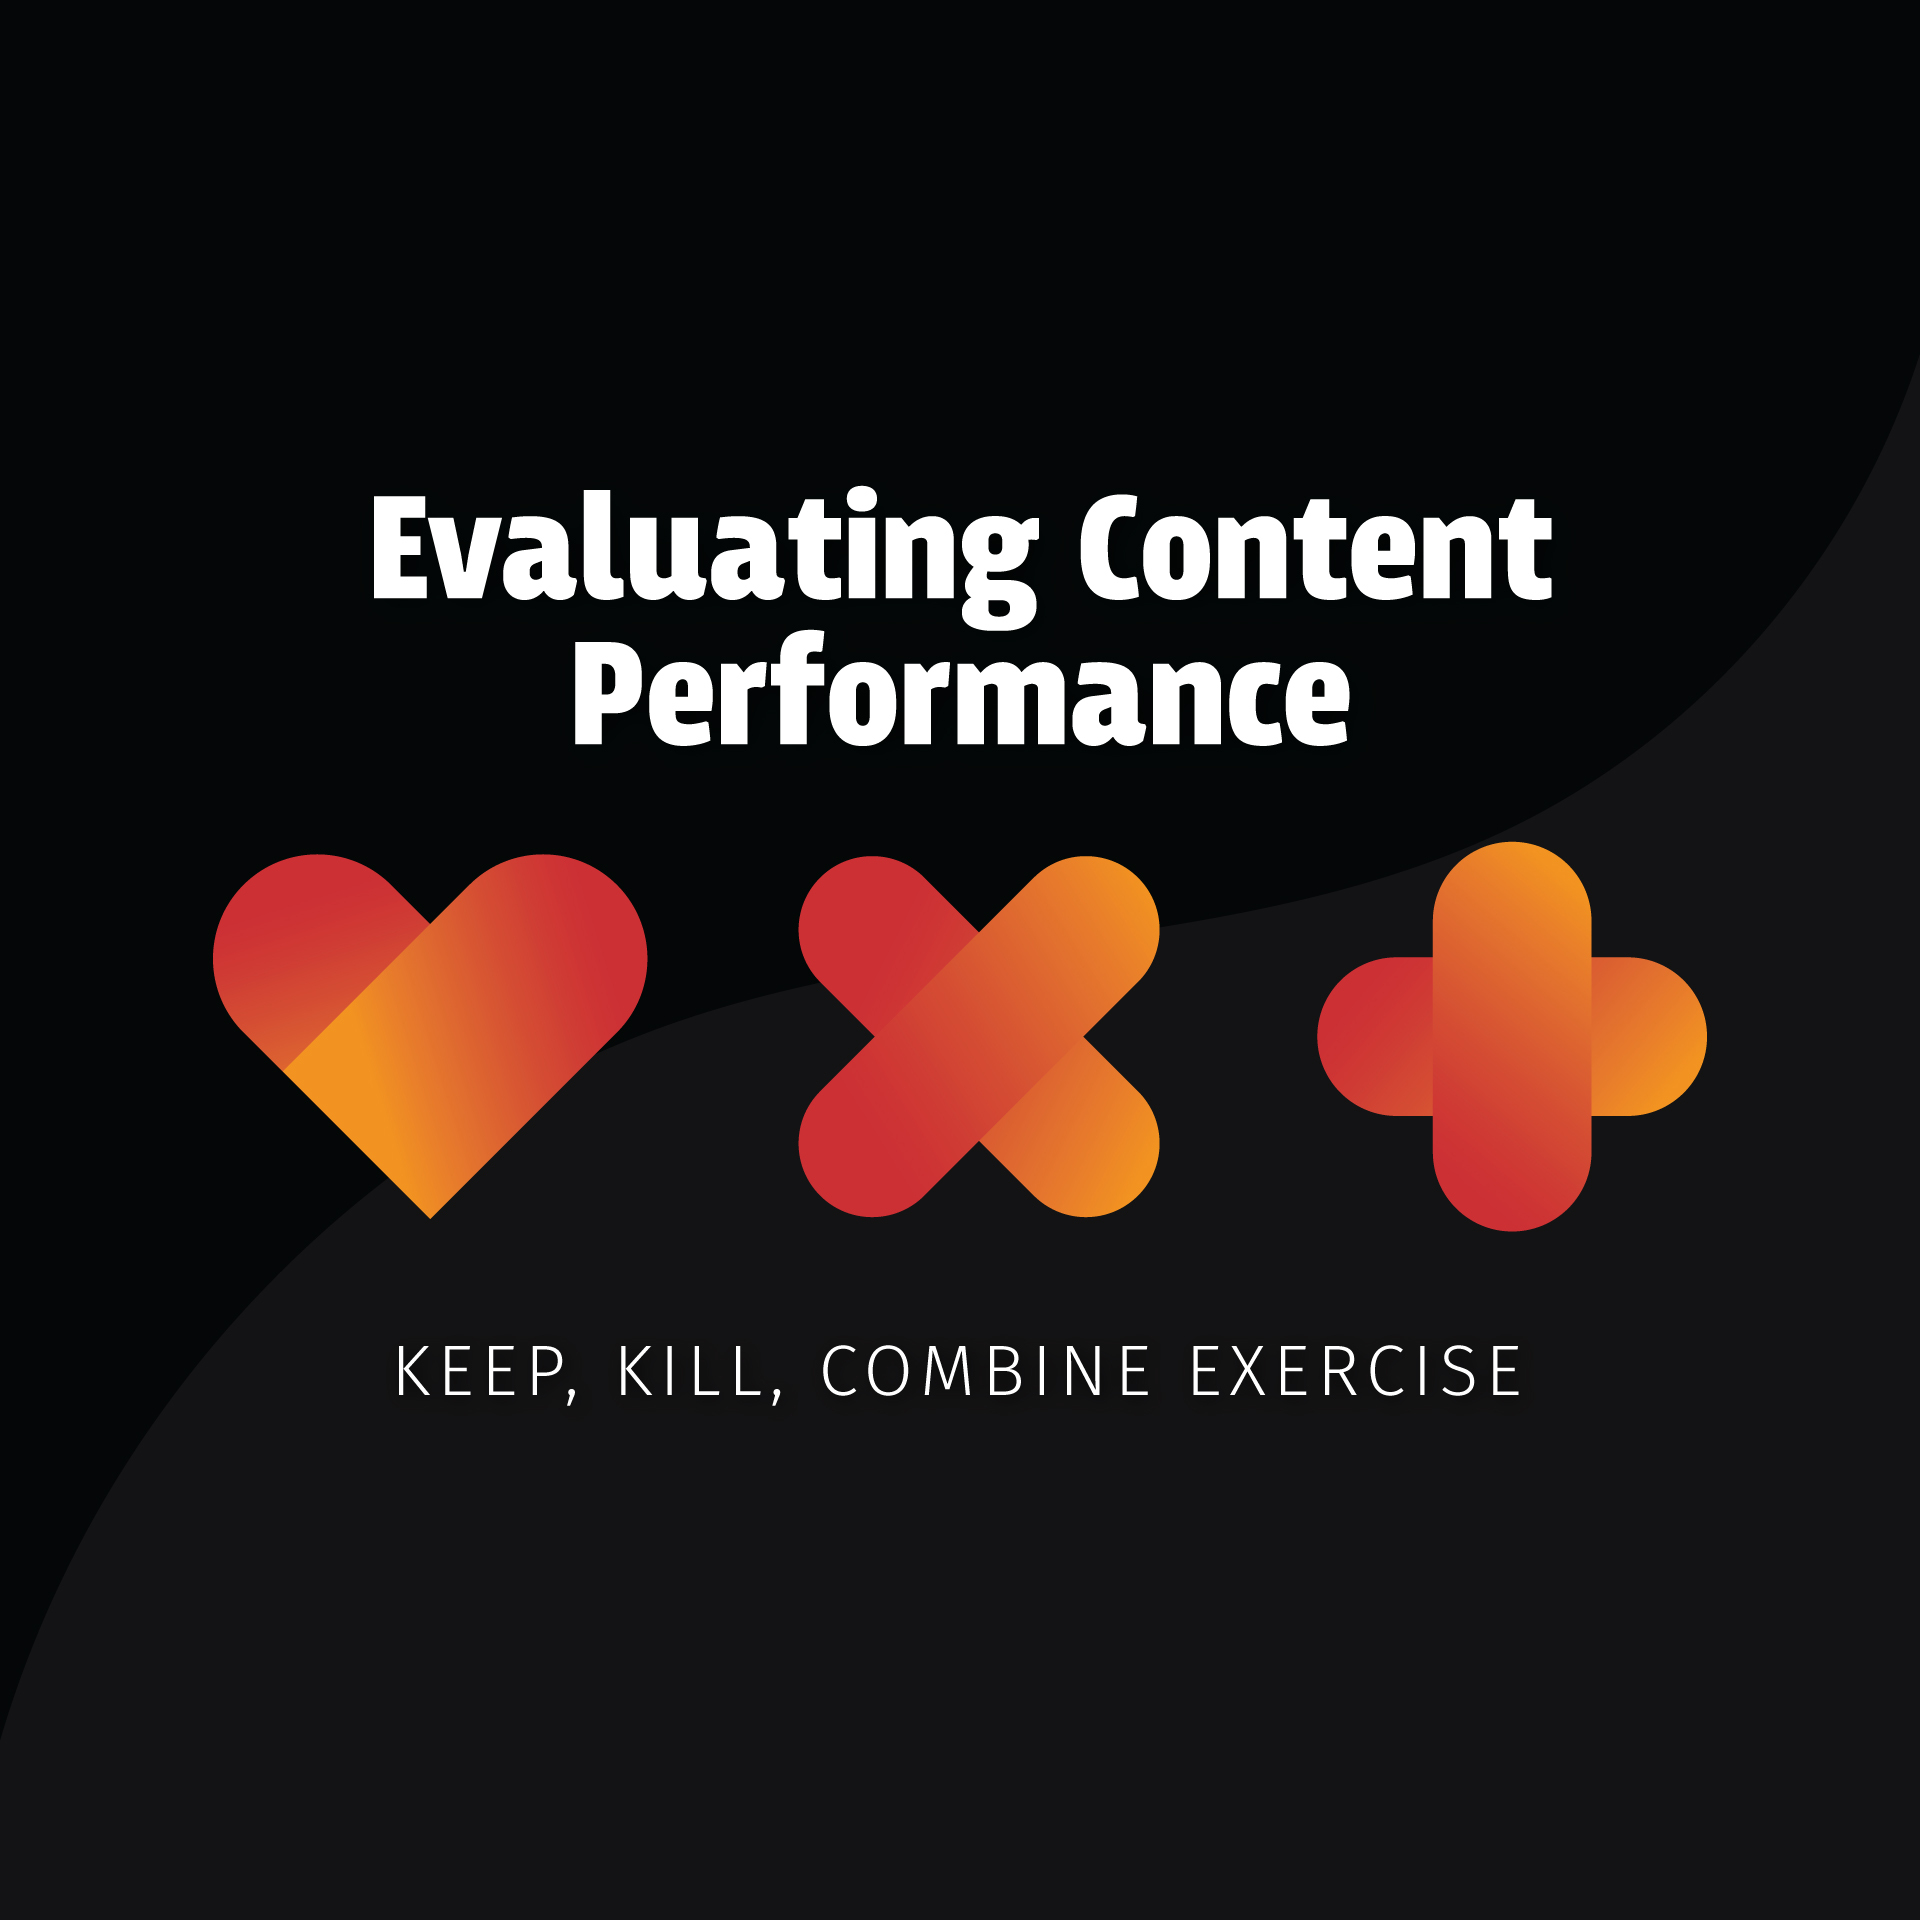 Keep, Kill, Combine - How To Evaluate Content Performance For Maximum Impact